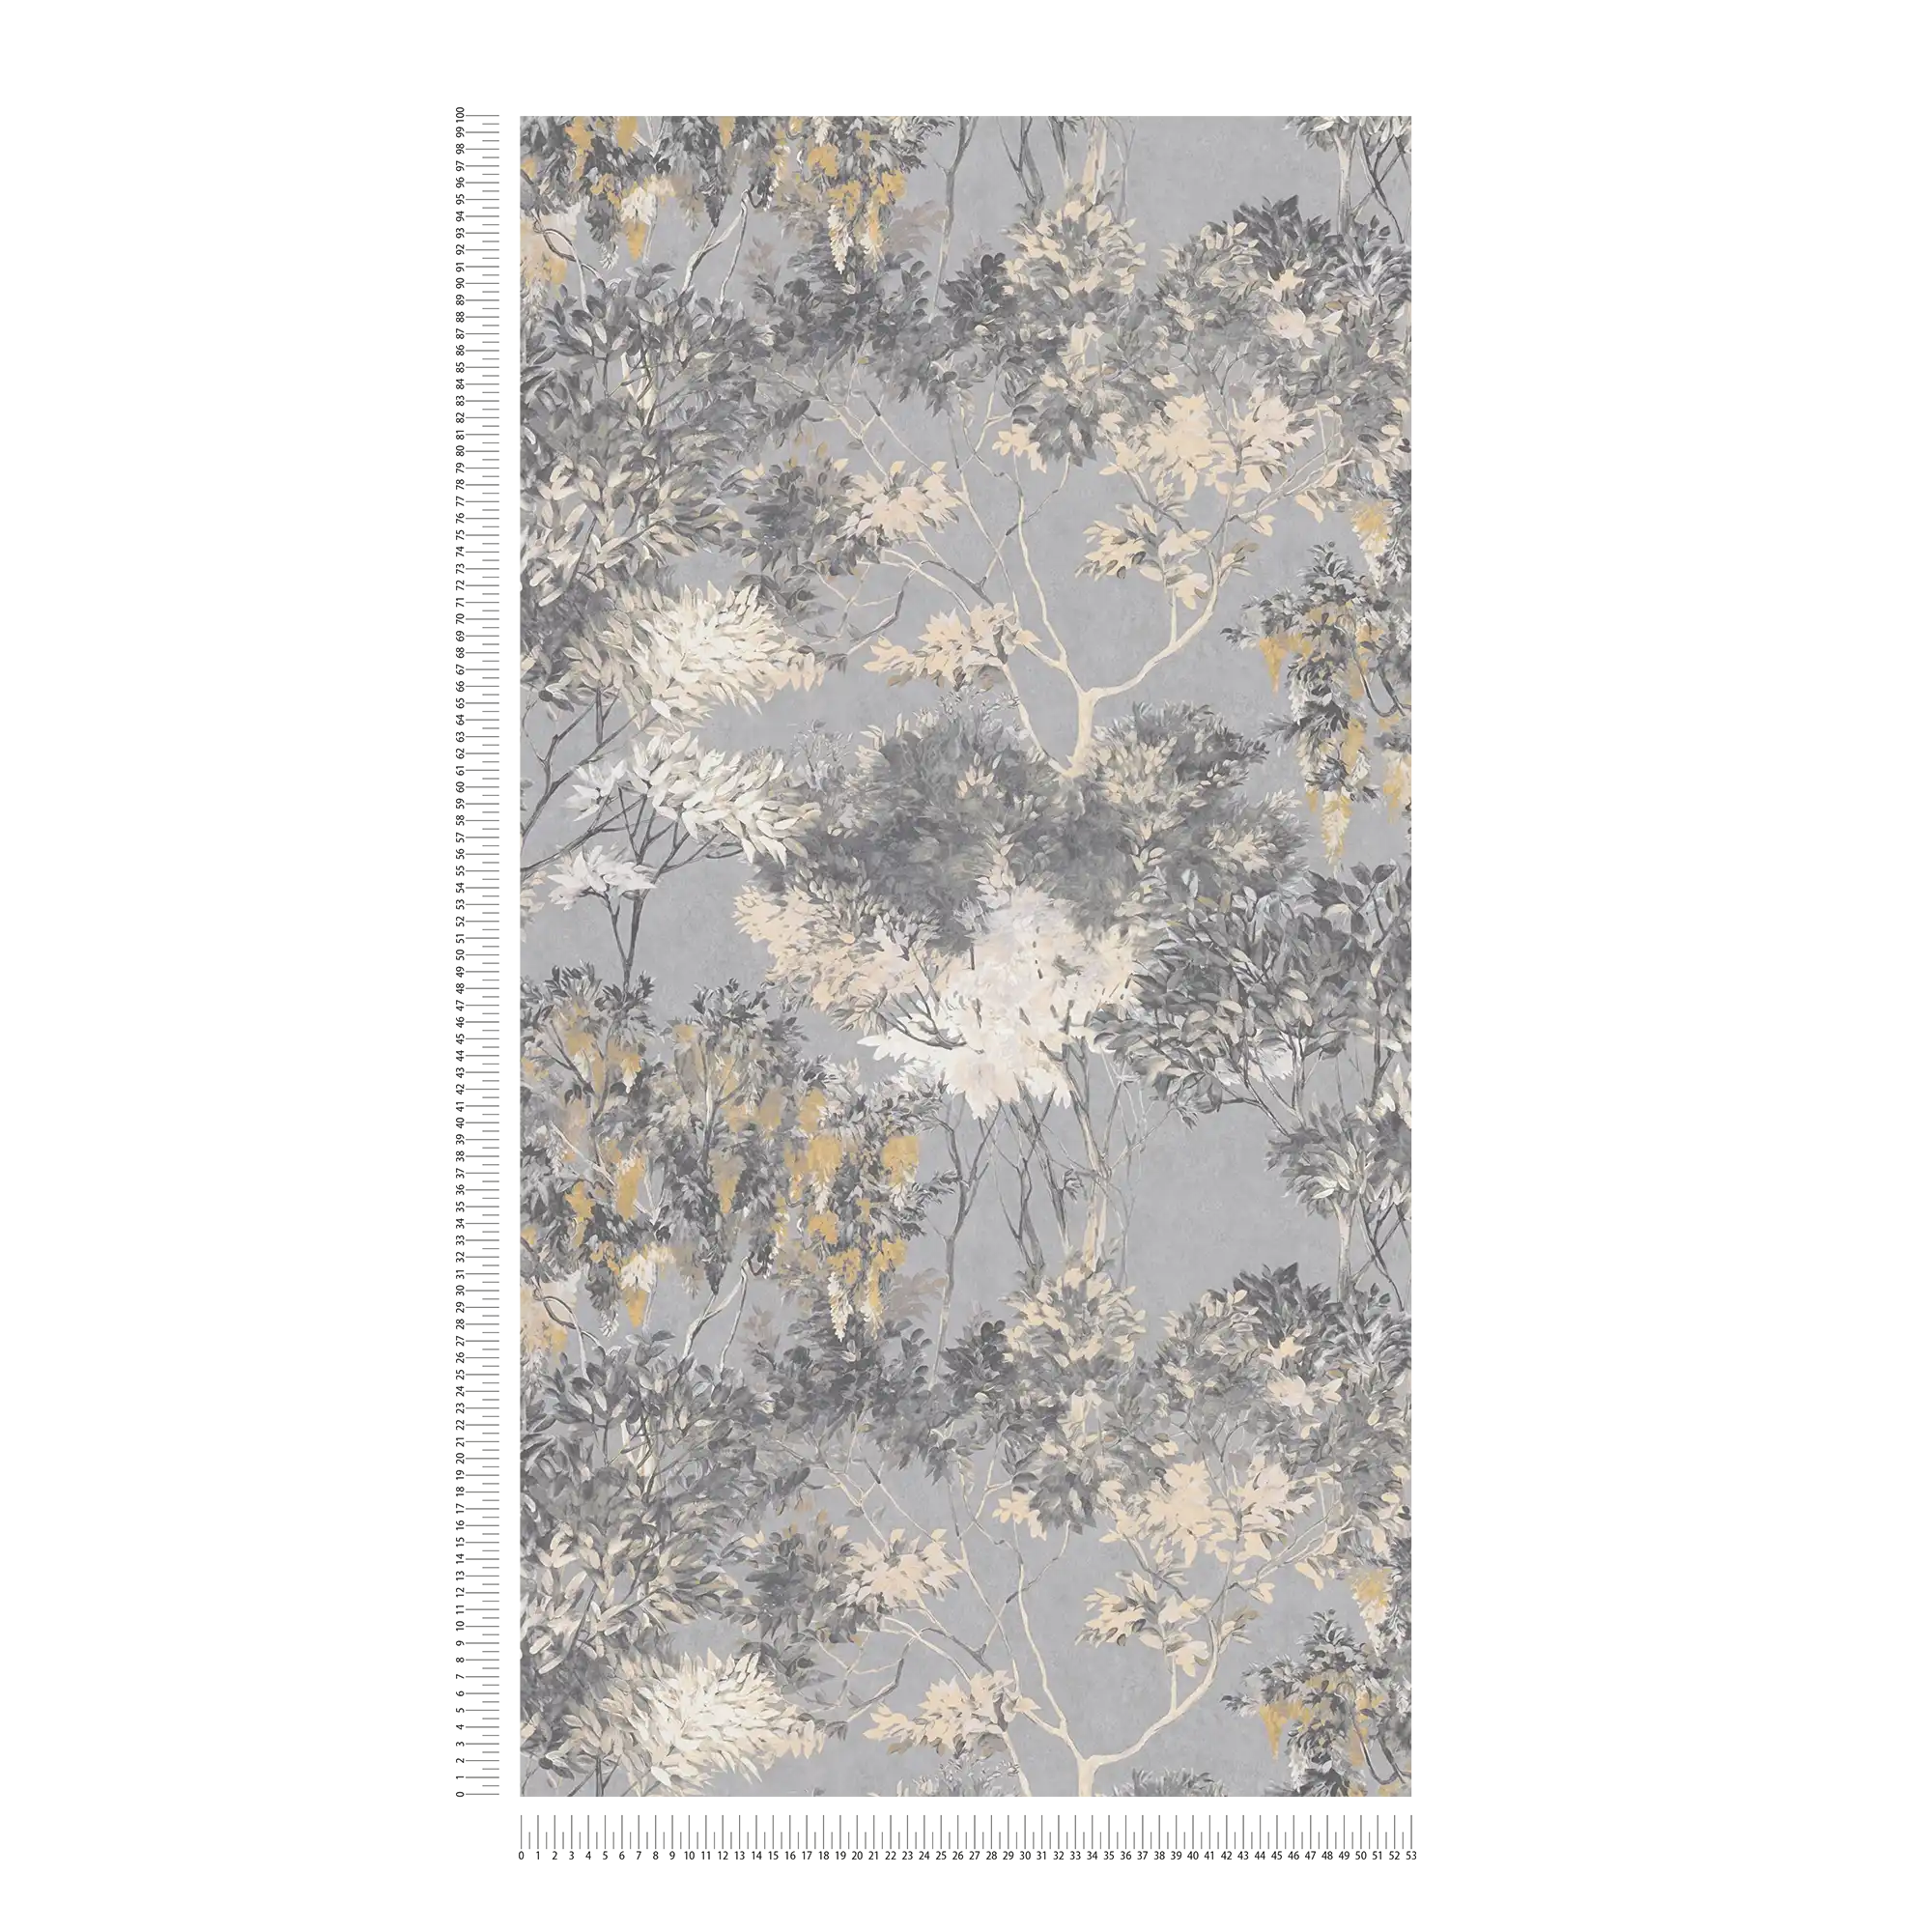             Jungle wallpaper with trees - grey, white, beige
        